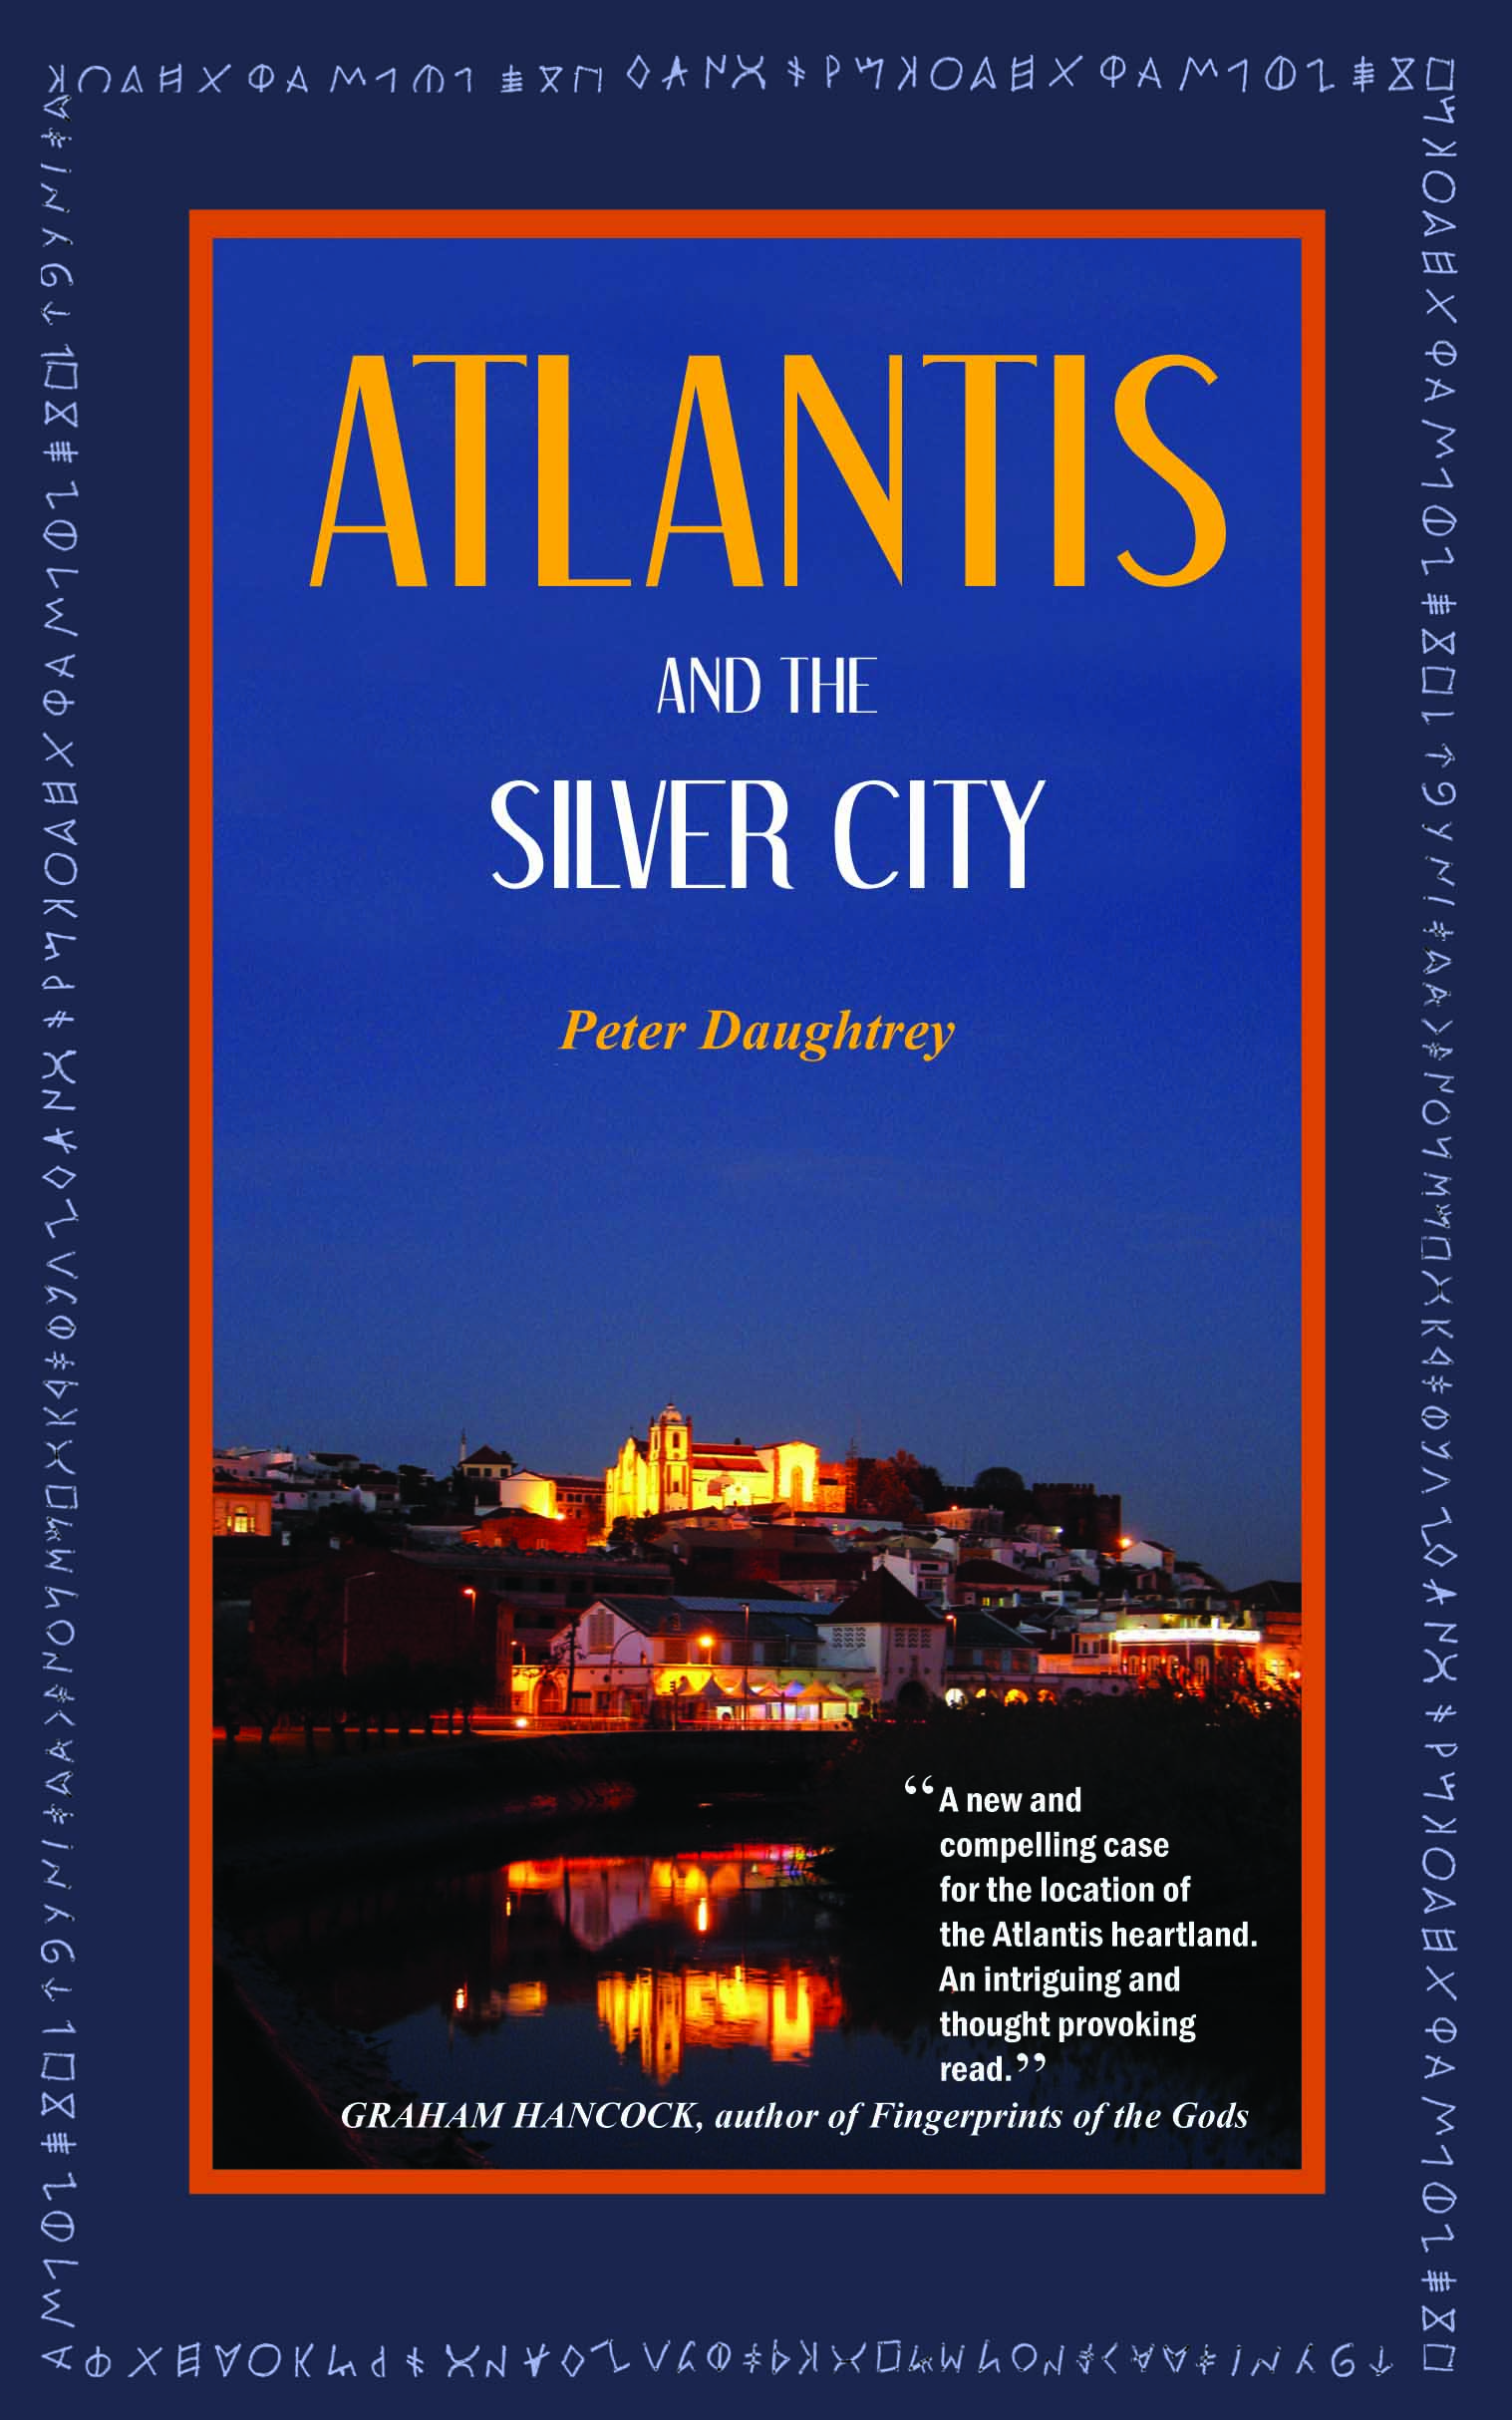 Book Review: Atlantis and The Silver City by Peter Daughtrey